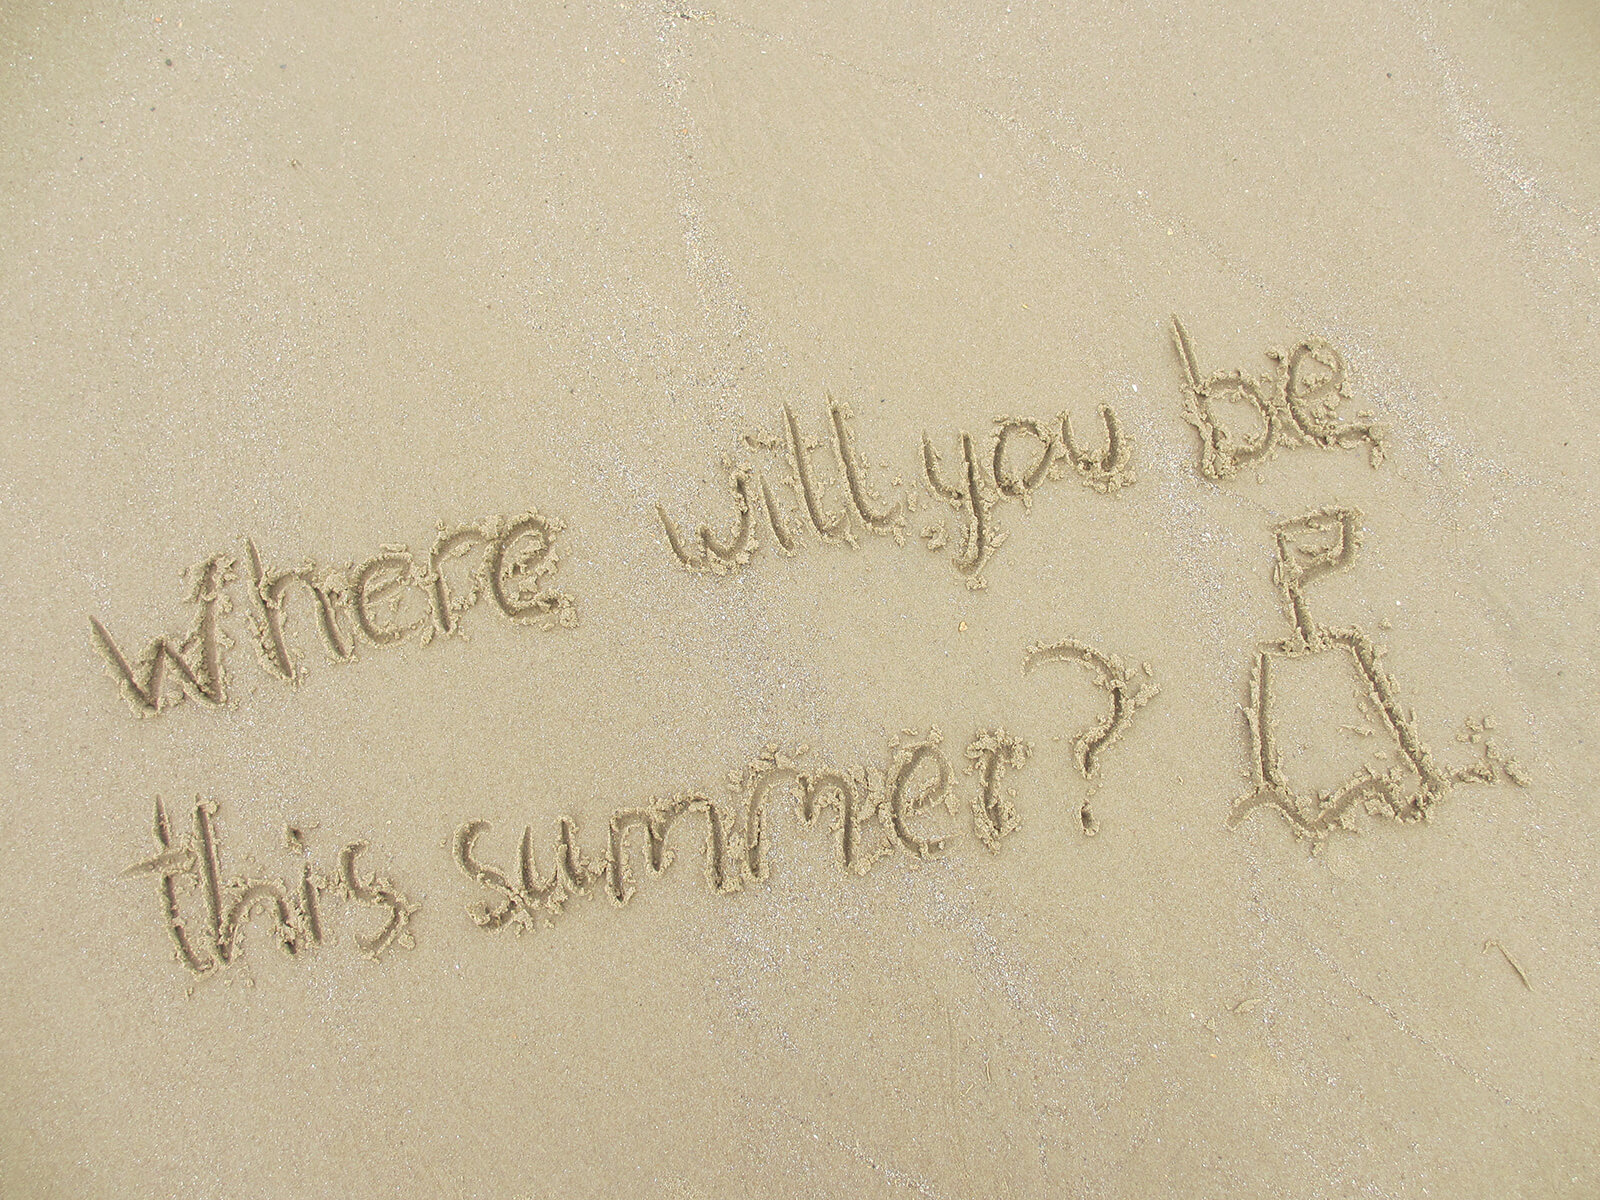 Where will you be this summer?